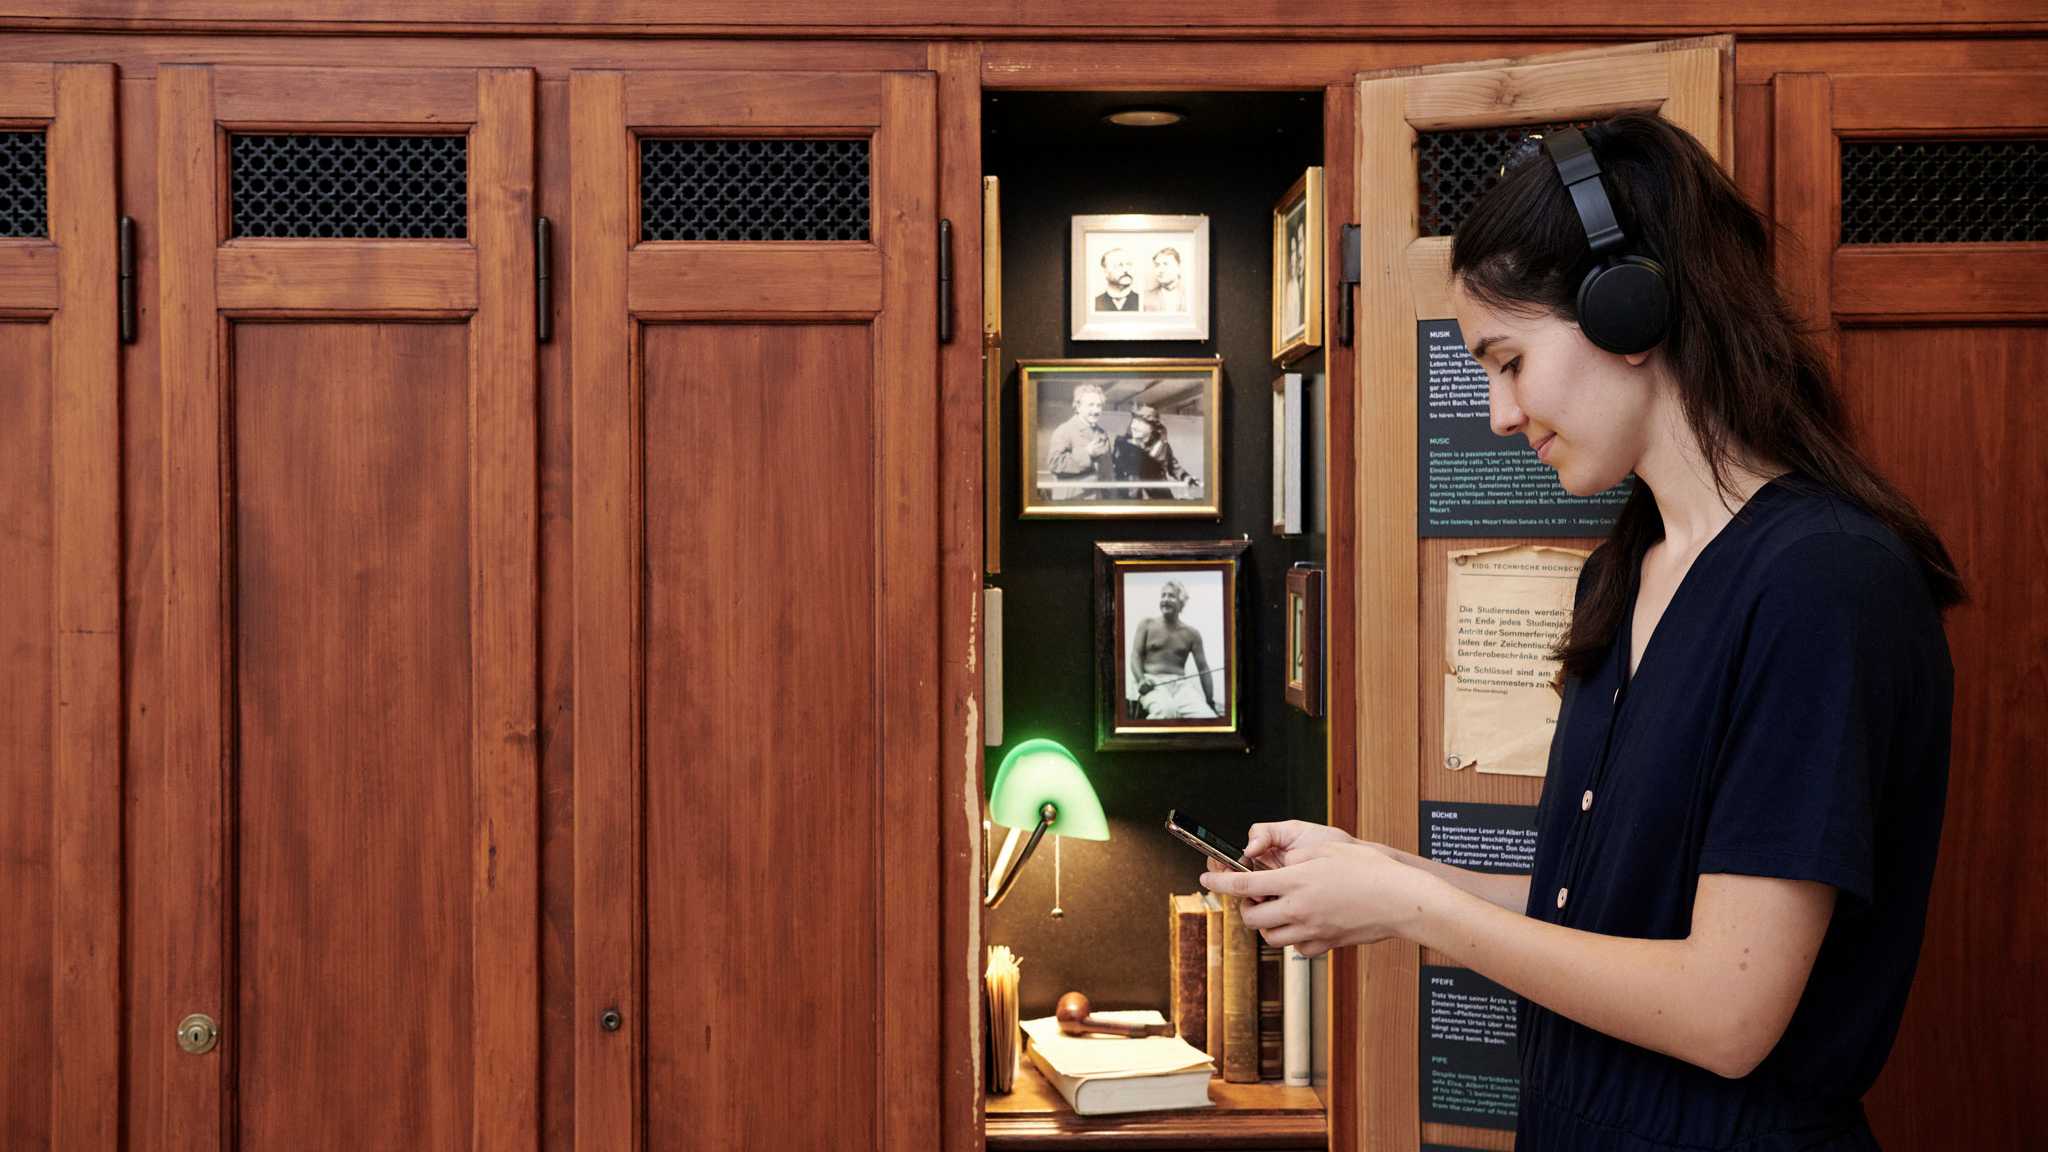 A visitor with mobile phone and headphones in front of Albert Einstein's locker